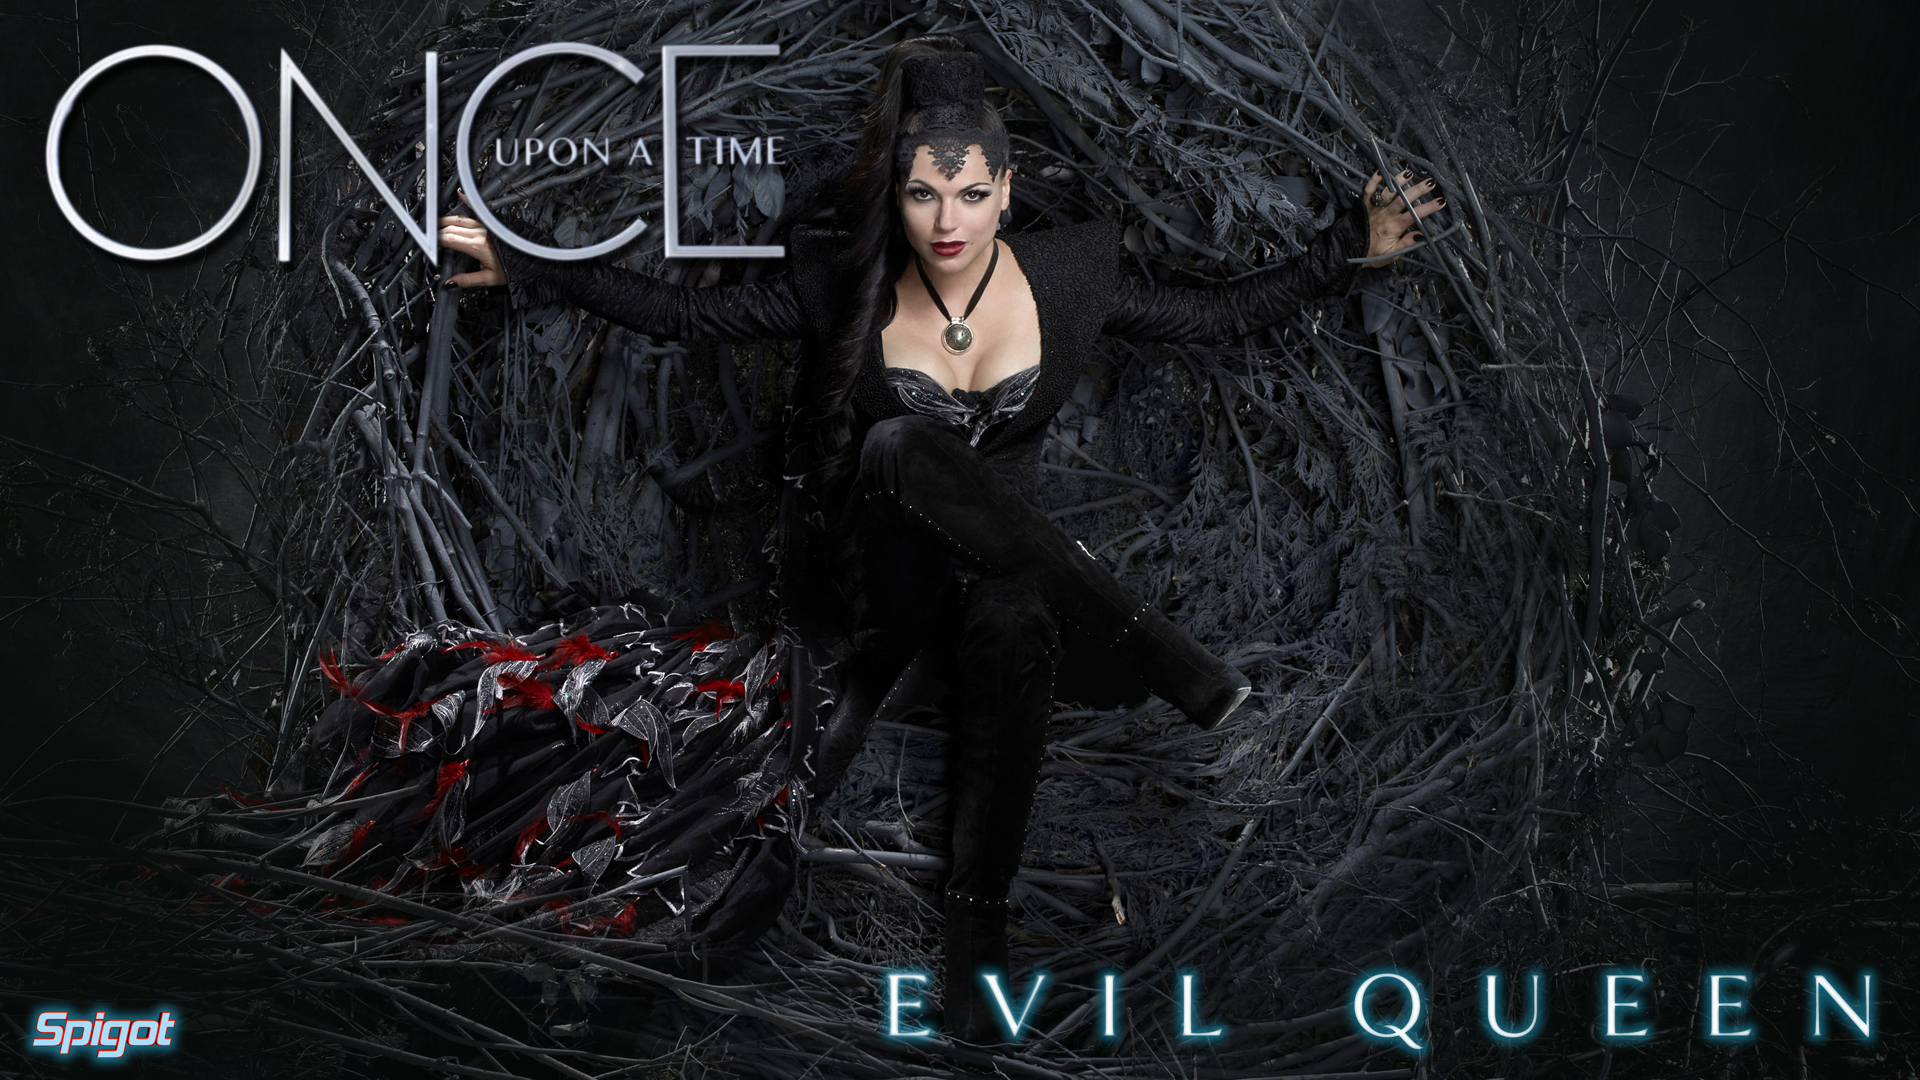 evil queen wallpaper,album cover,darkness,goth subculture,font,photography